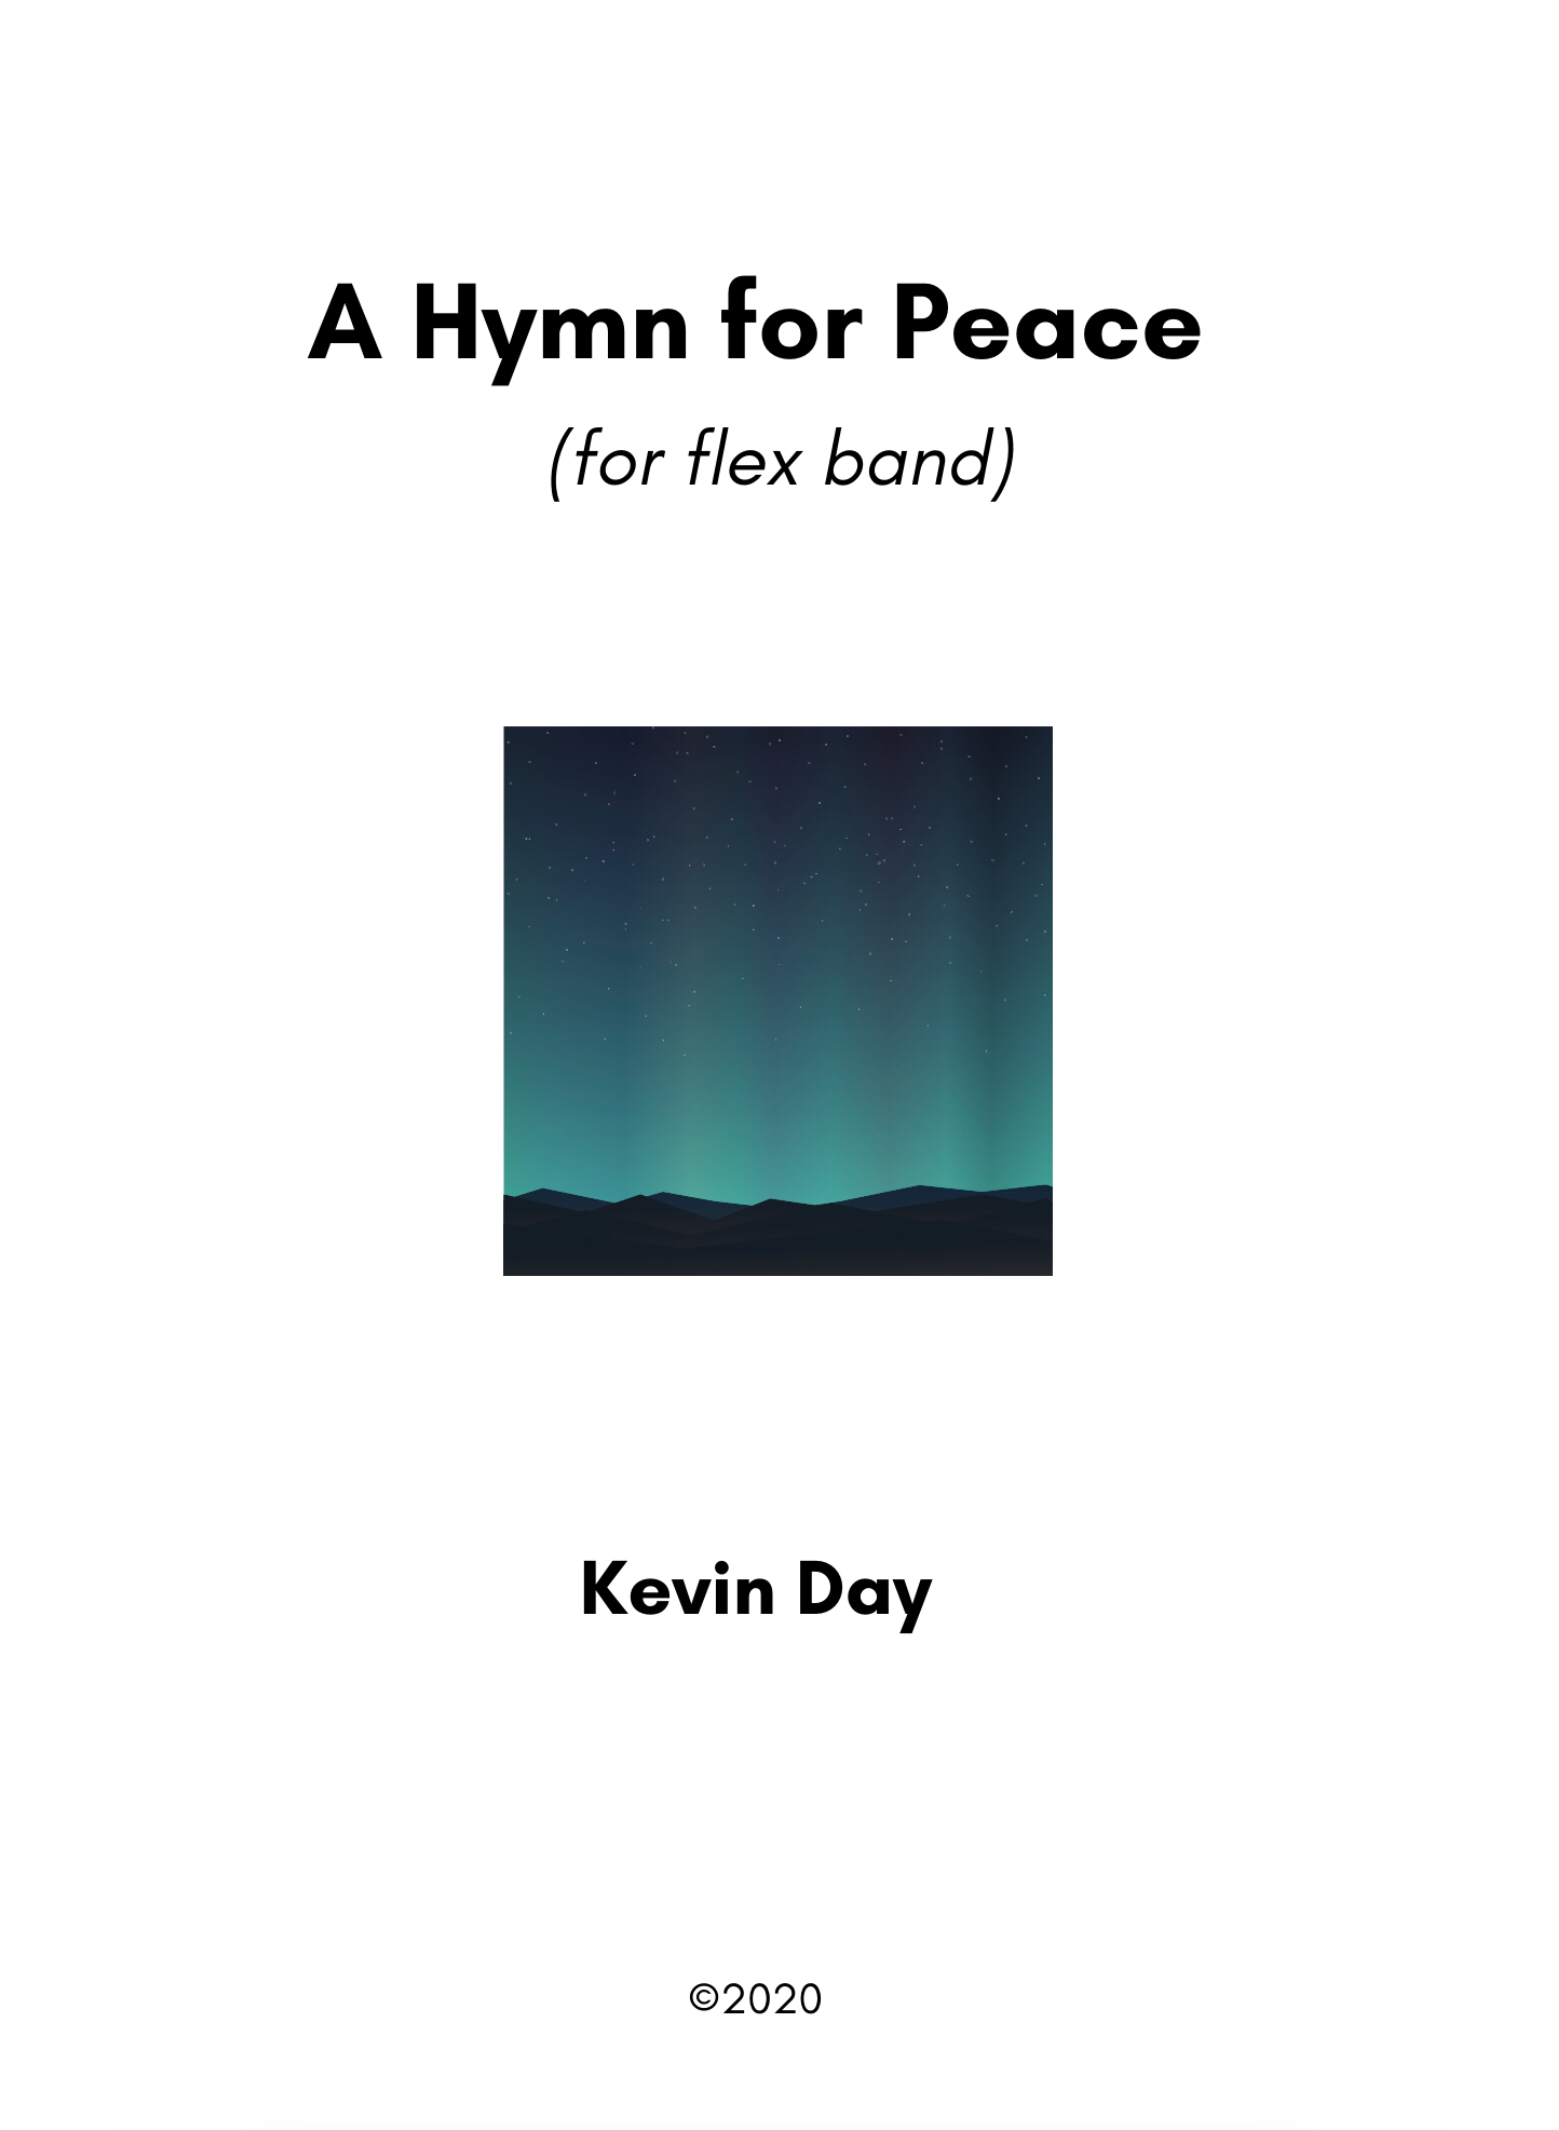 A Hymn For Peace (Flex Band Version Score Only) by Kevin Day